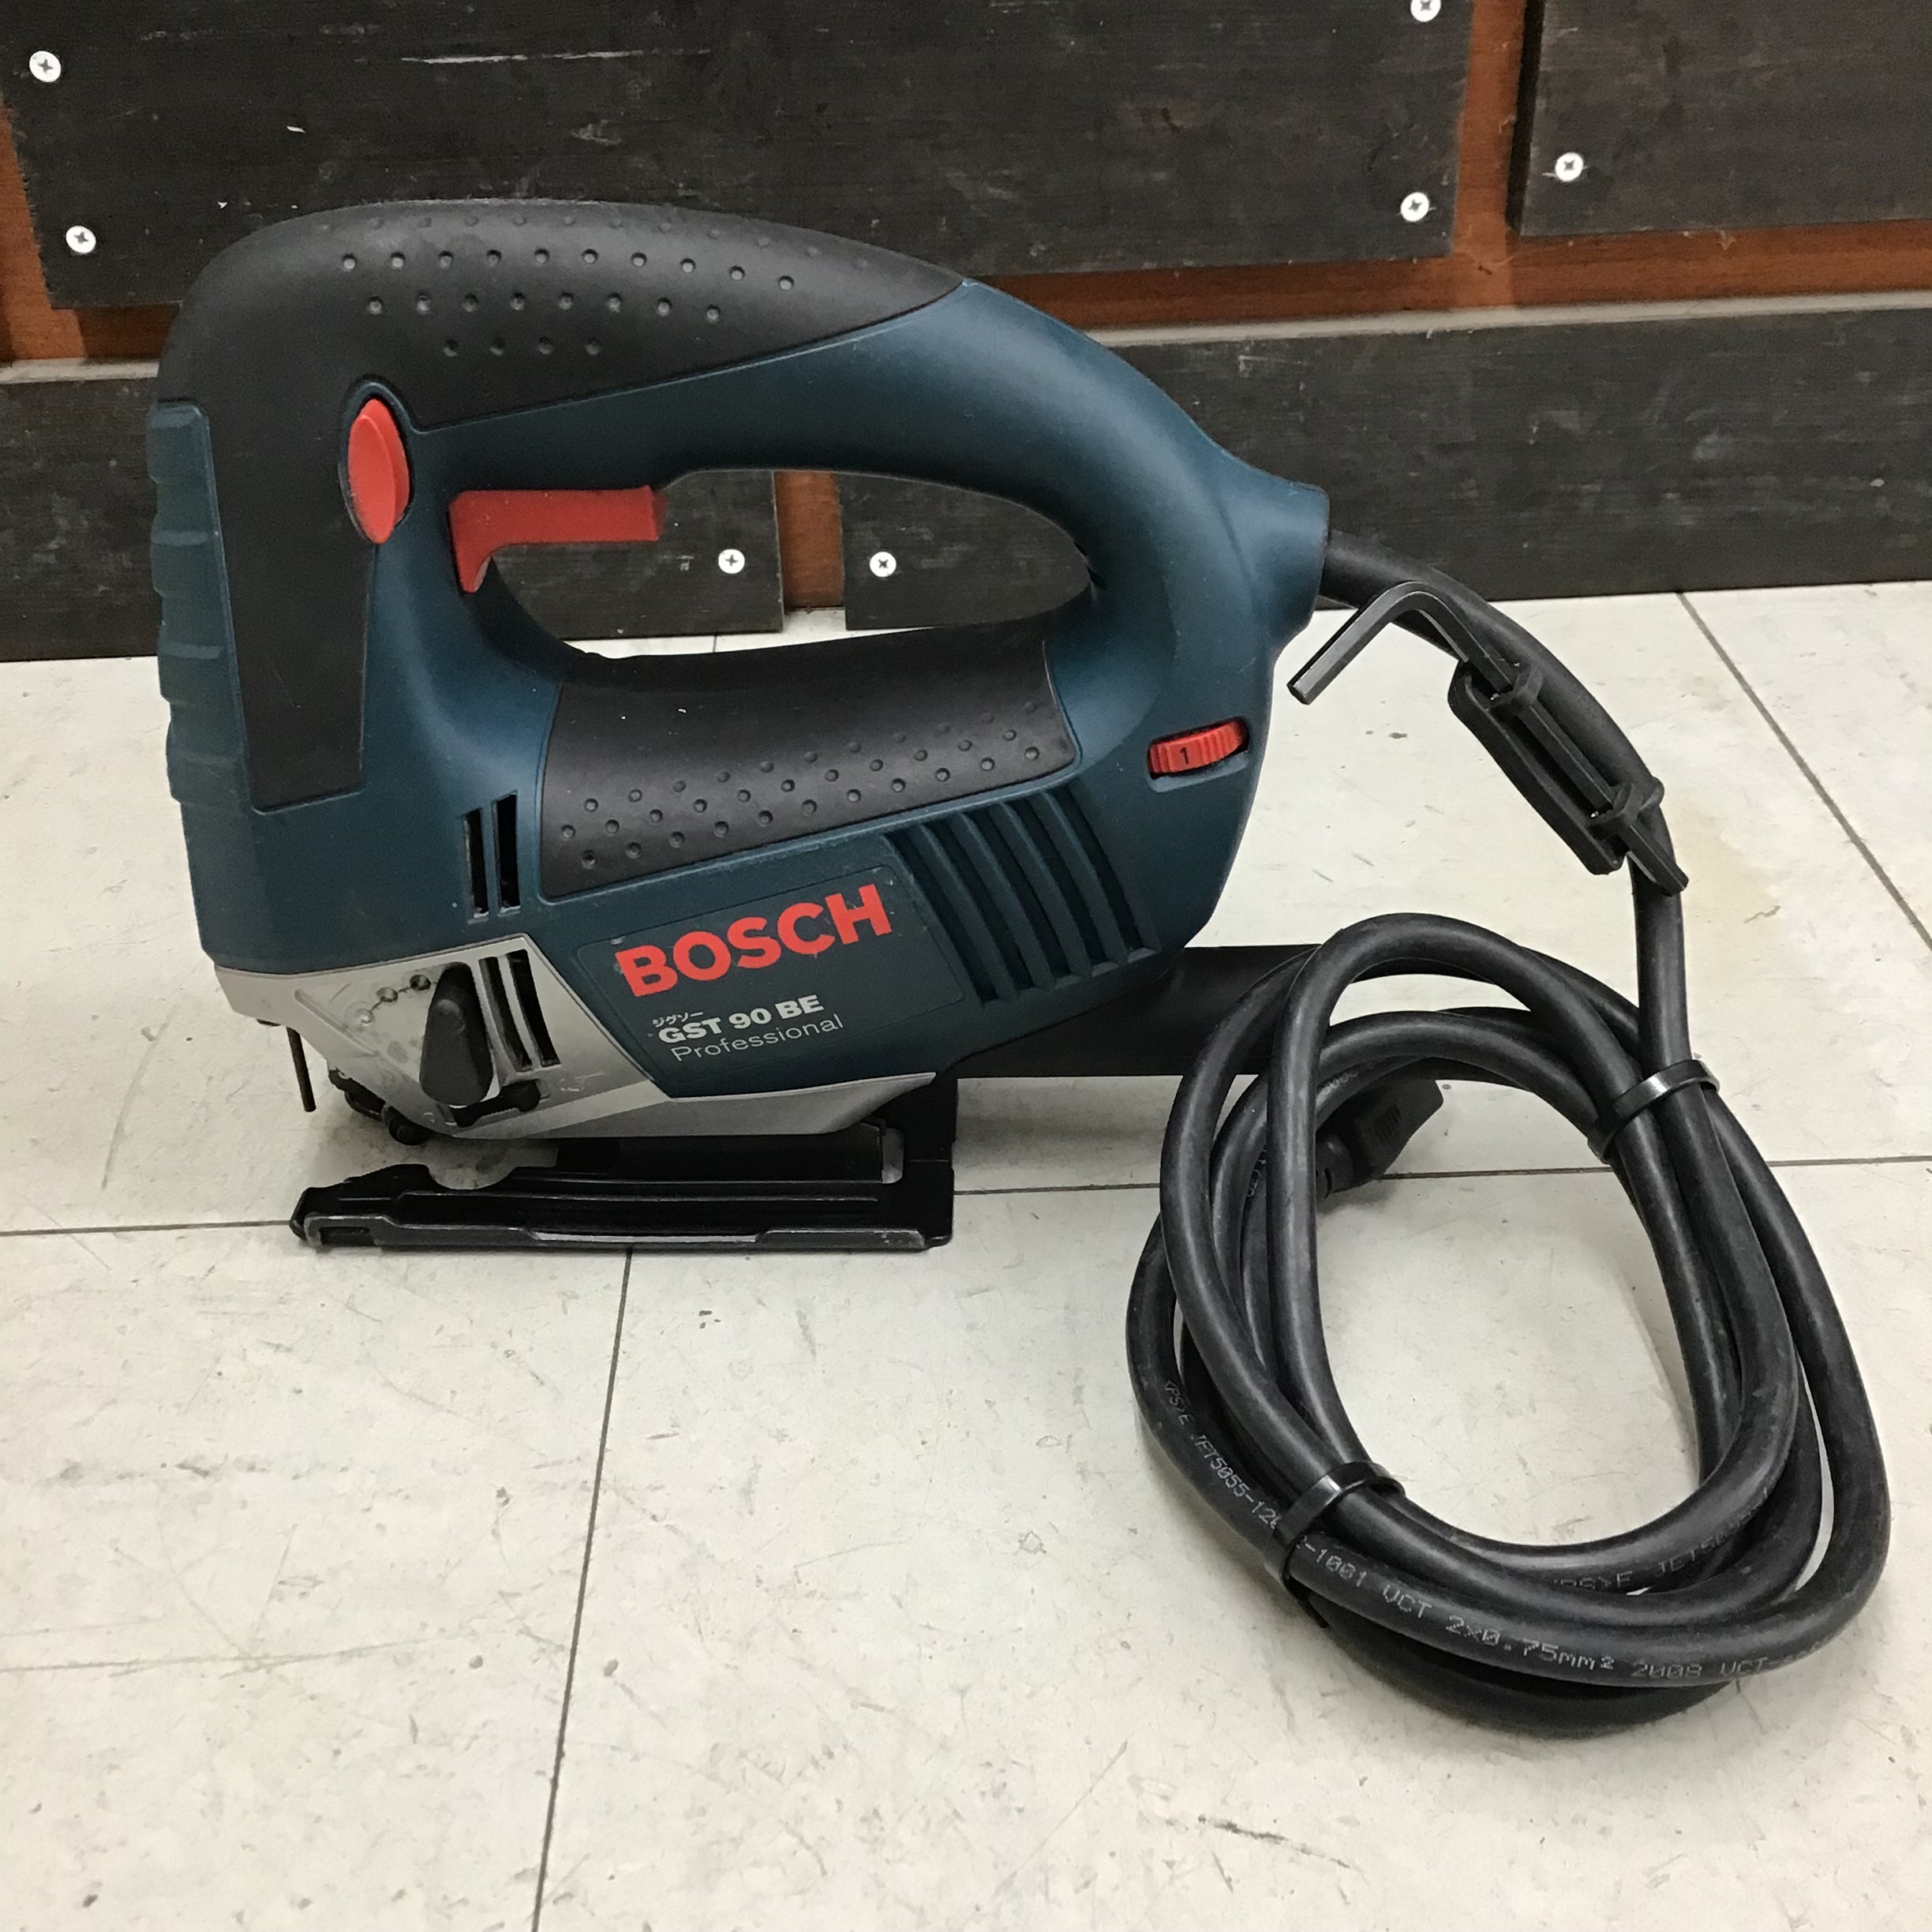 〇BOSCH(ボッシュ) ジグソー GST90BE/N 【鴻巣店】 | アクトツール